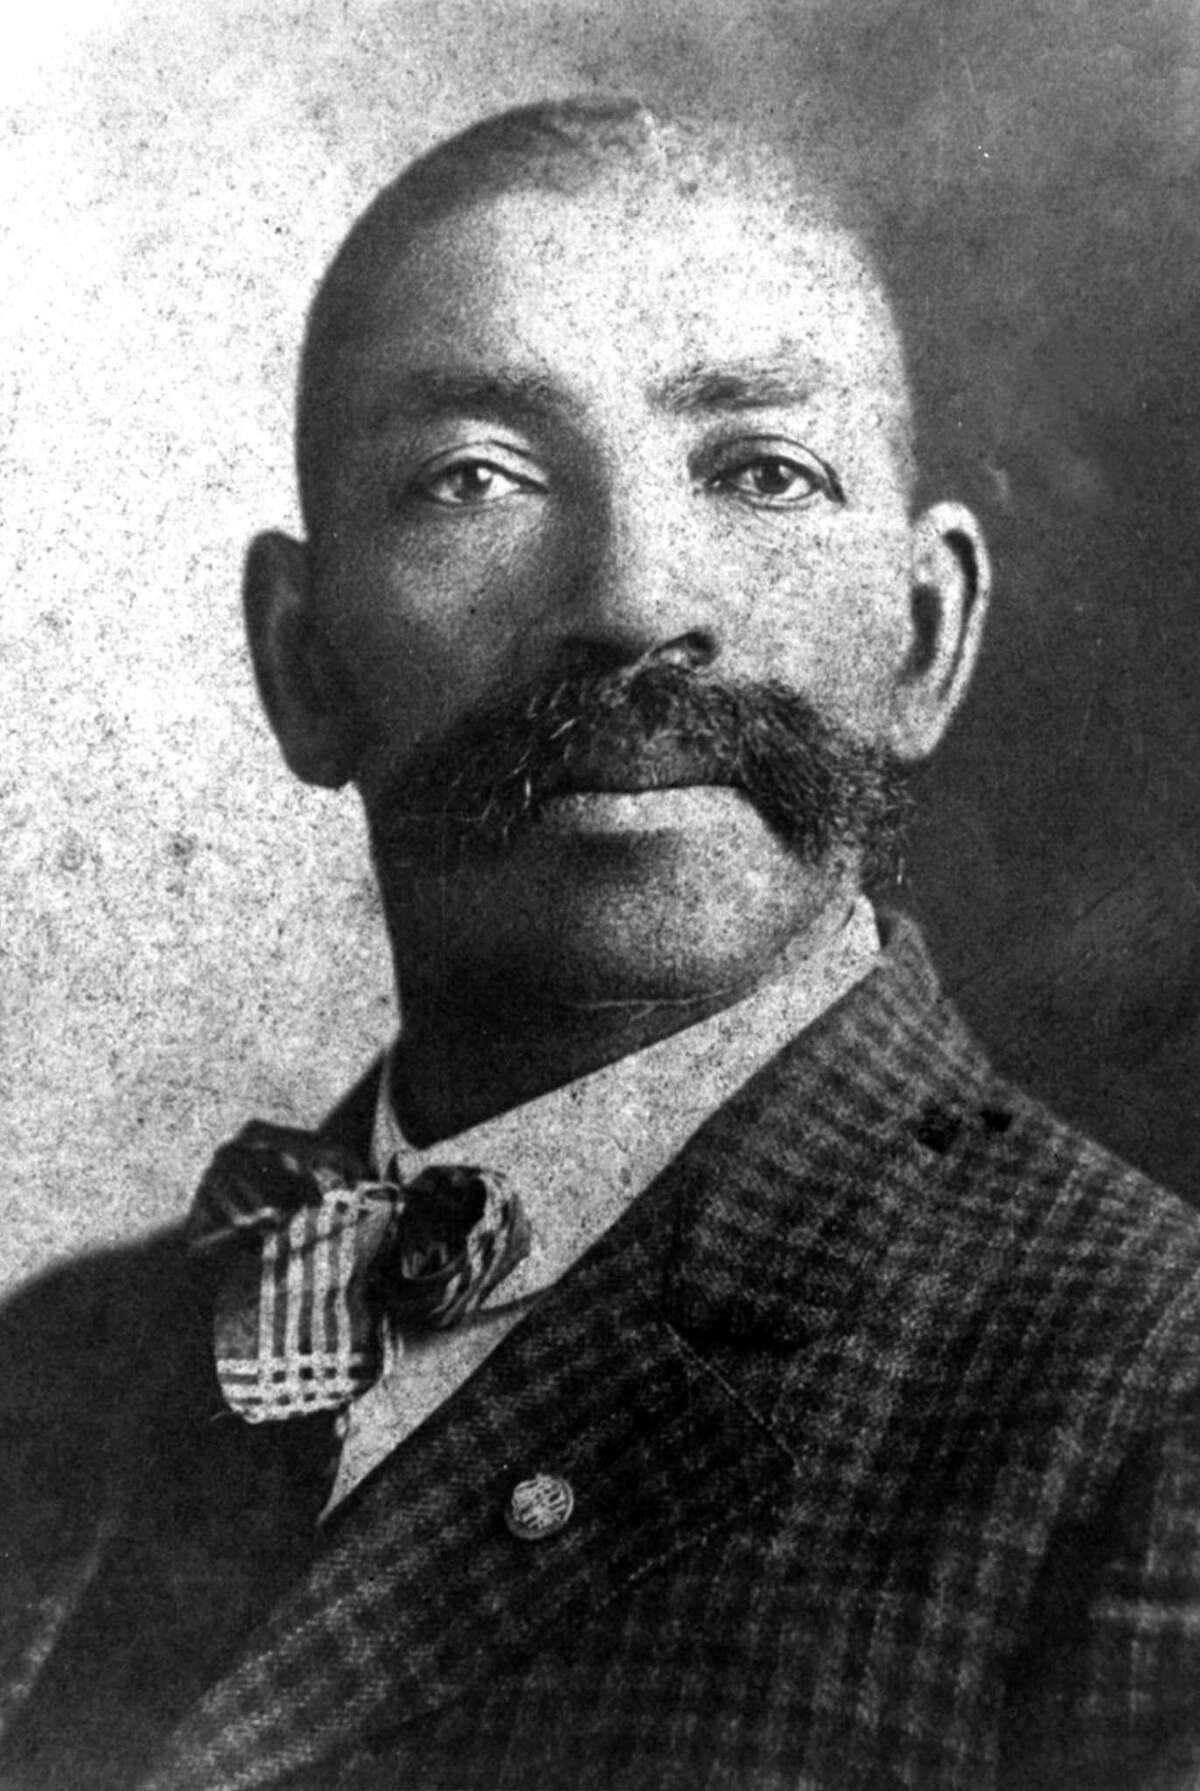 As an African-American youngster growing up in small-town Oklahoma and looking for a Black Wyatt Earp, author and historian Art T. Burton found him in Bass Reeves, a feared and respected deputy U.S. Marshall for 32 years.